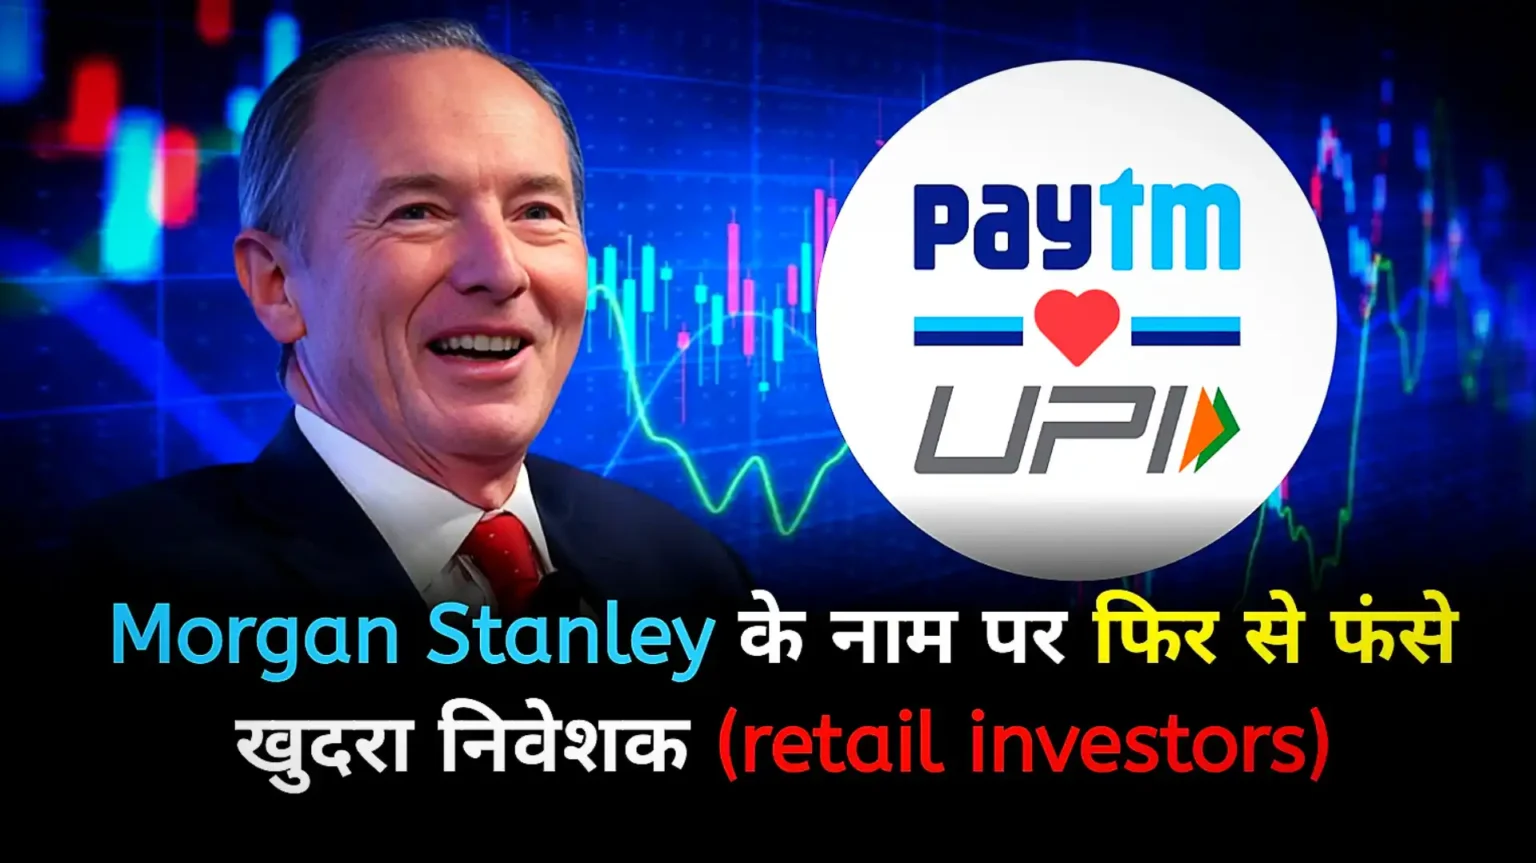 Retail investors again trapped in Paytm shares in the name of Morgan Stanley